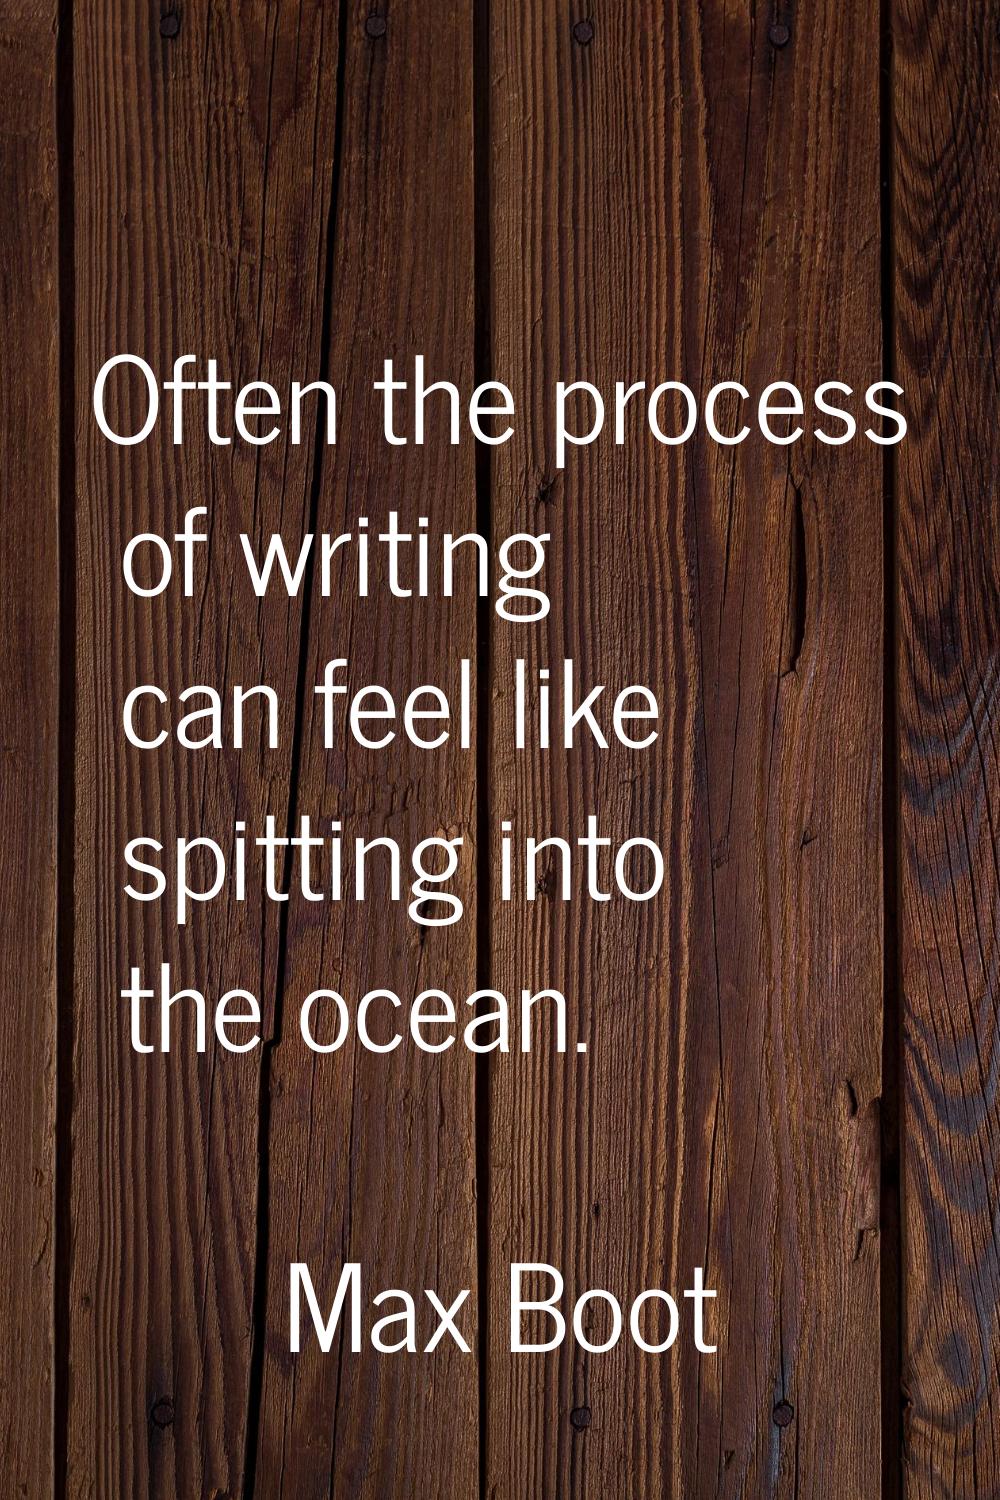 Often the process of writing can feel like spitting into the ocean.